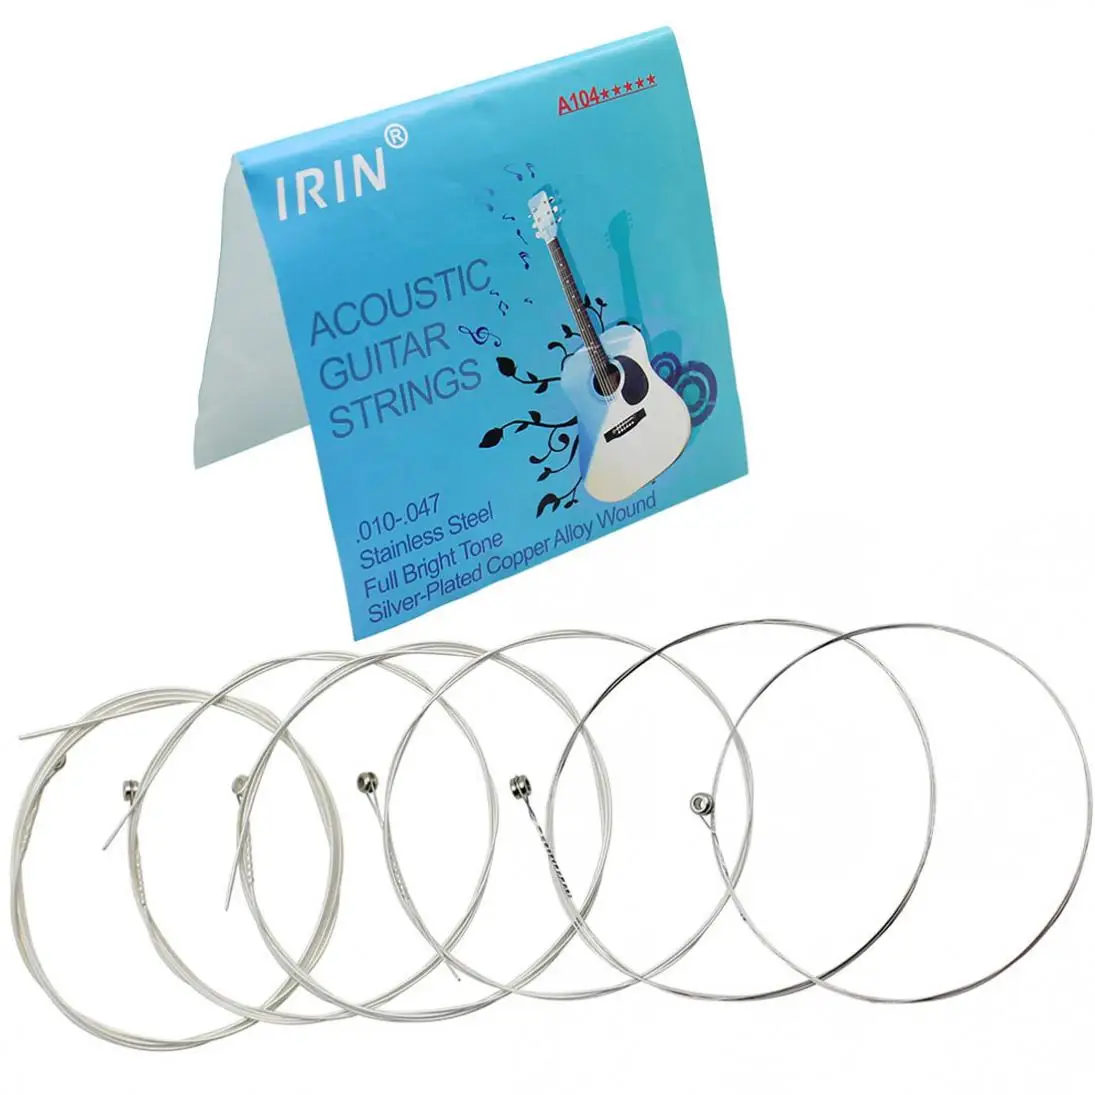 

6pcs/lot IRIN A104 0.010-0.047 Inch Silver Plated Music Instrument Strings replacement for Acoustic Guitar with Full Bright Tone